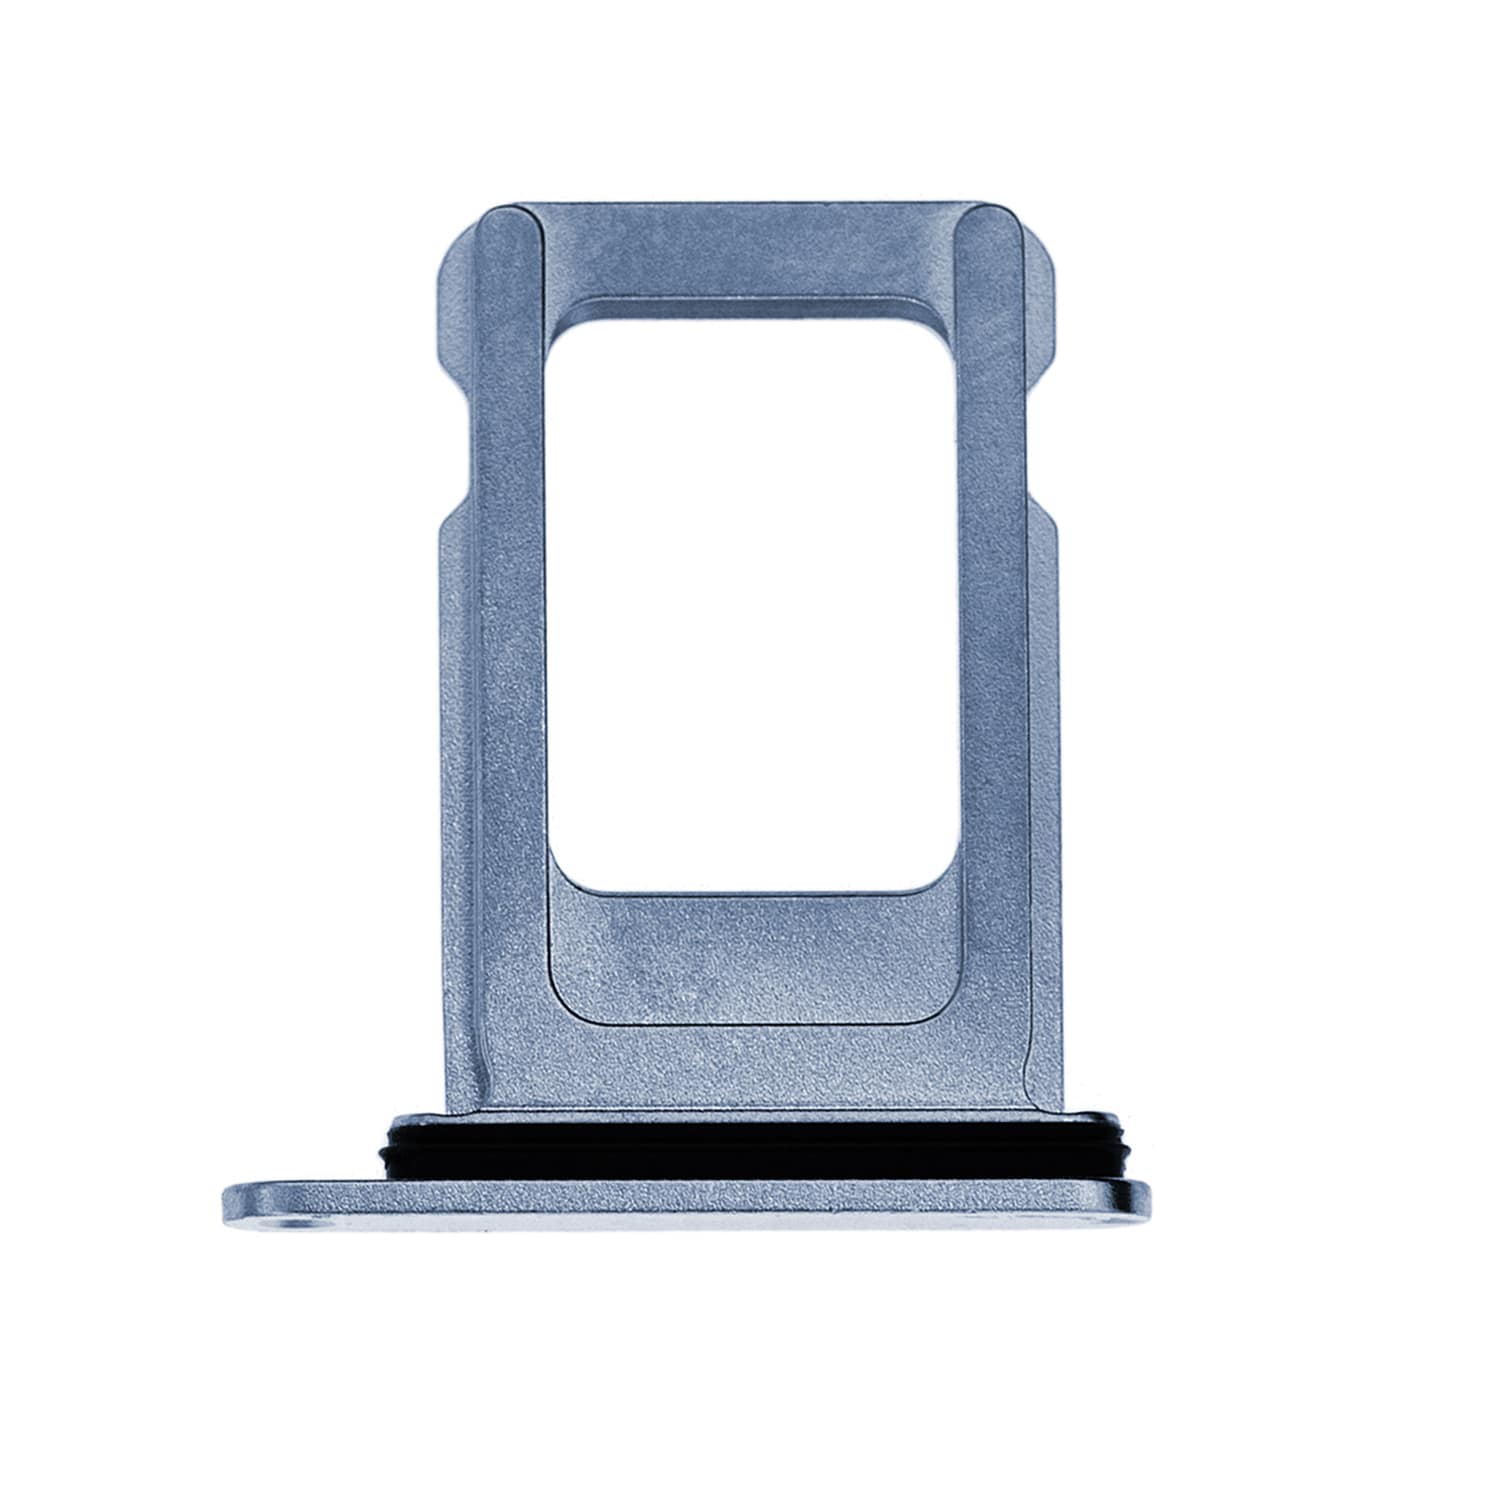 Apple iPhone 13 Pro/iPhone 13 Pro Max Simcard Holder -  Sierra Blue